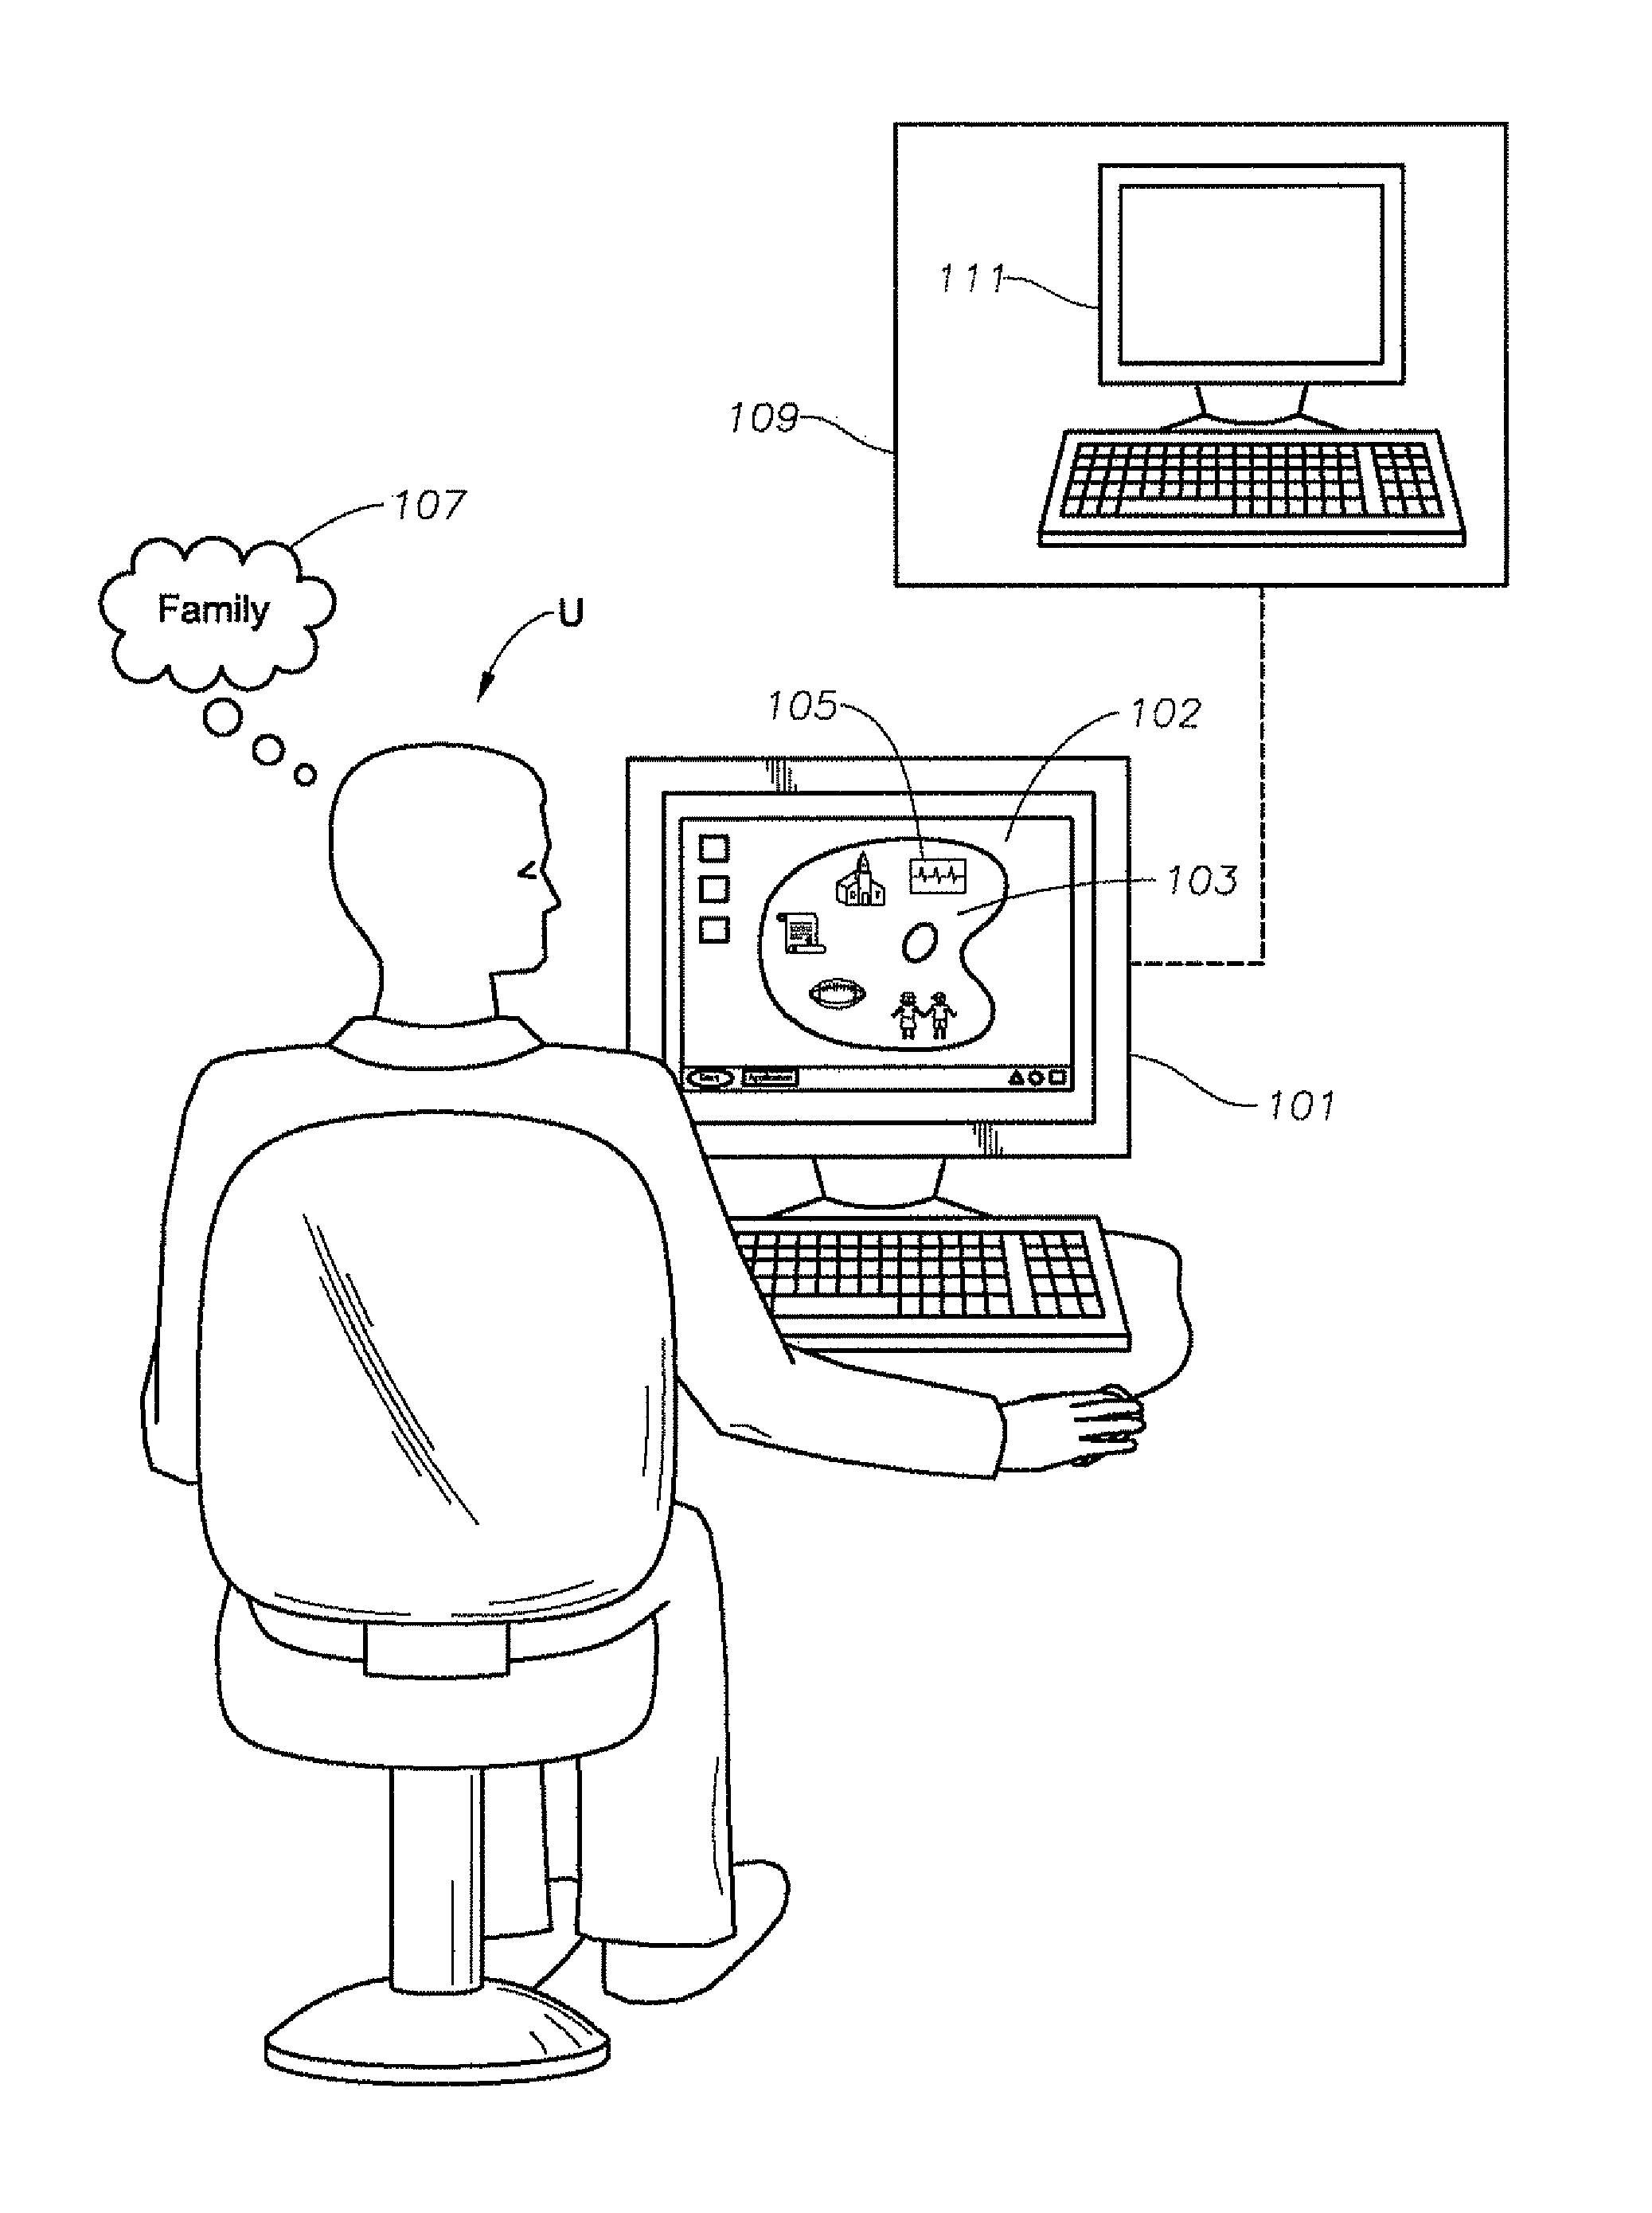 Machine, program product, and computer-implemented method for file management, storage, and display